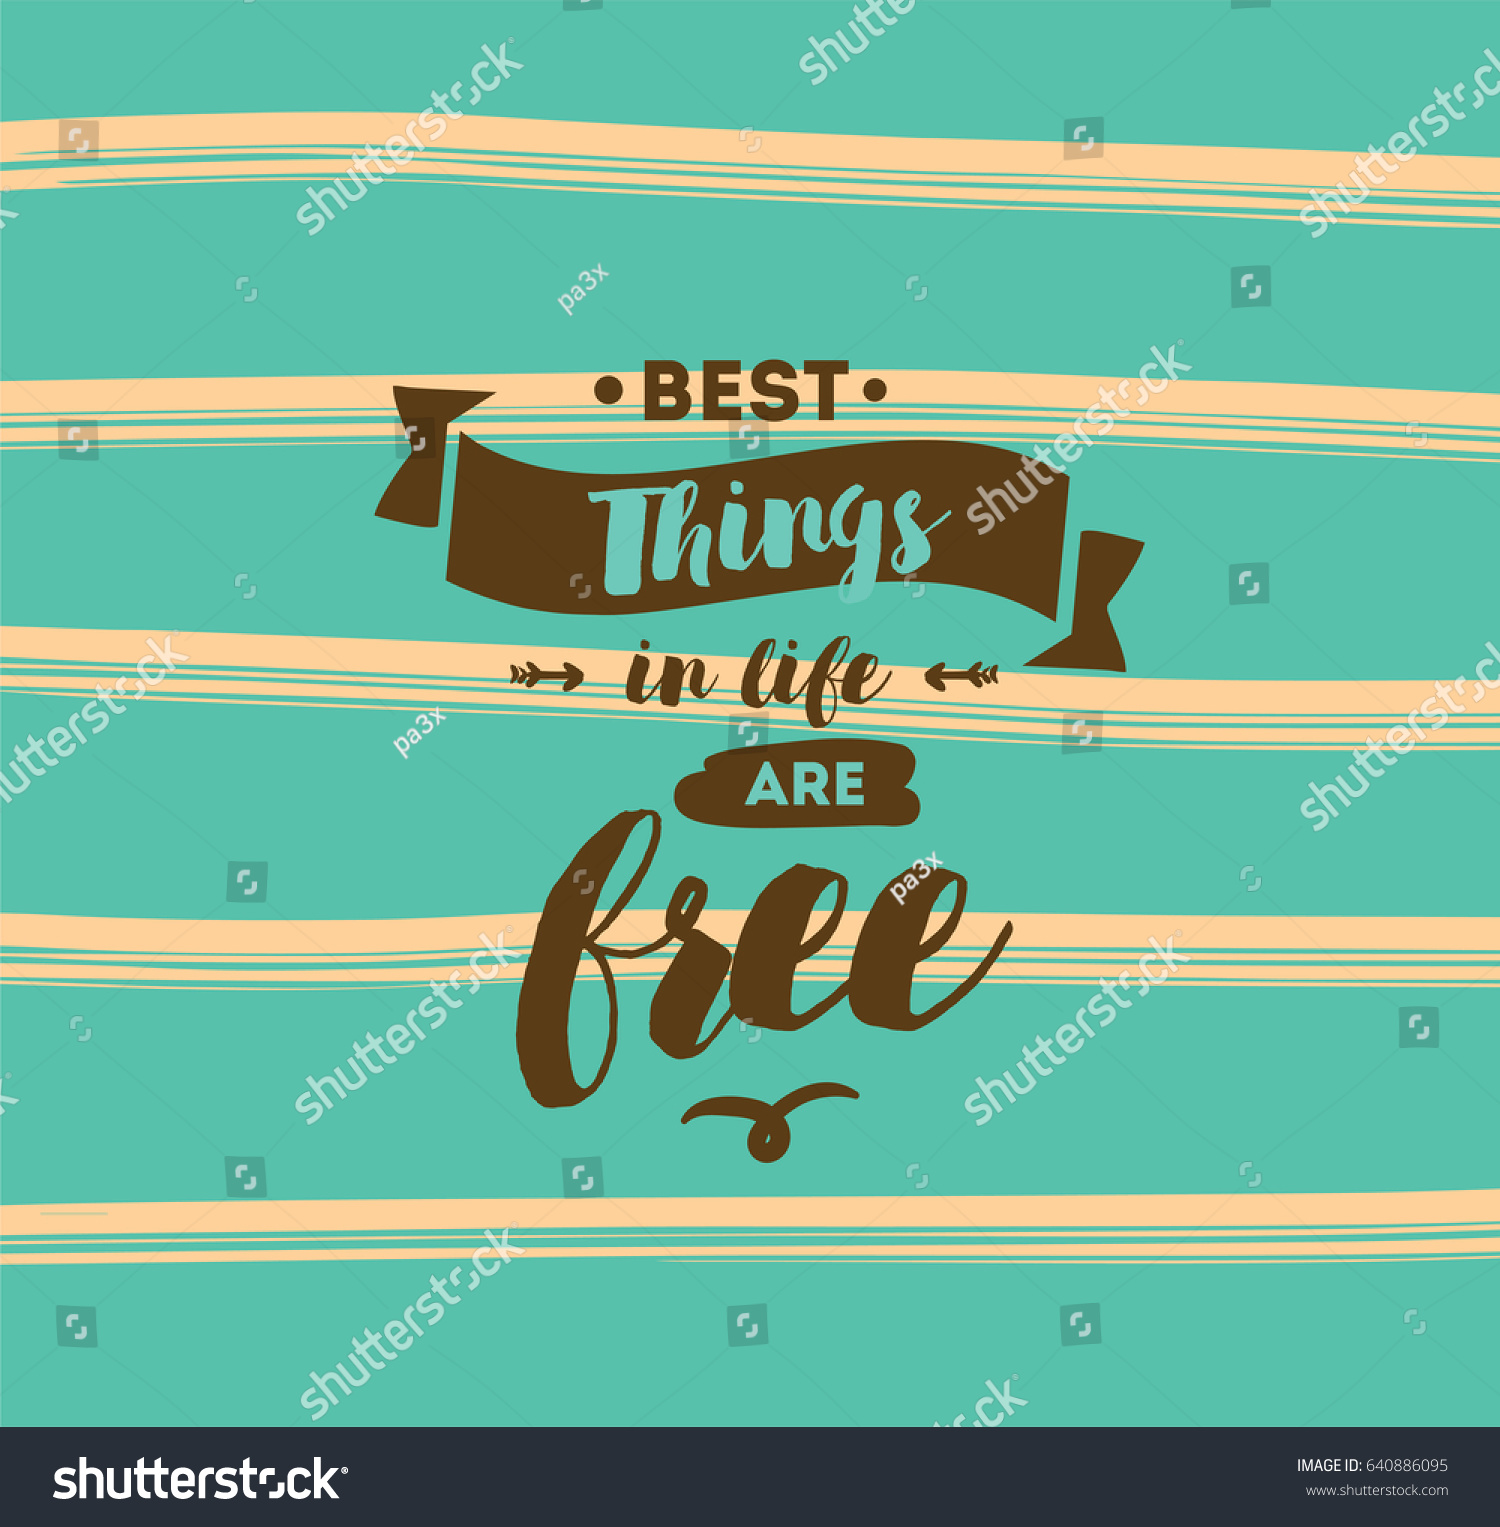 best things in life quotes best things life free inspirational quote stock vector